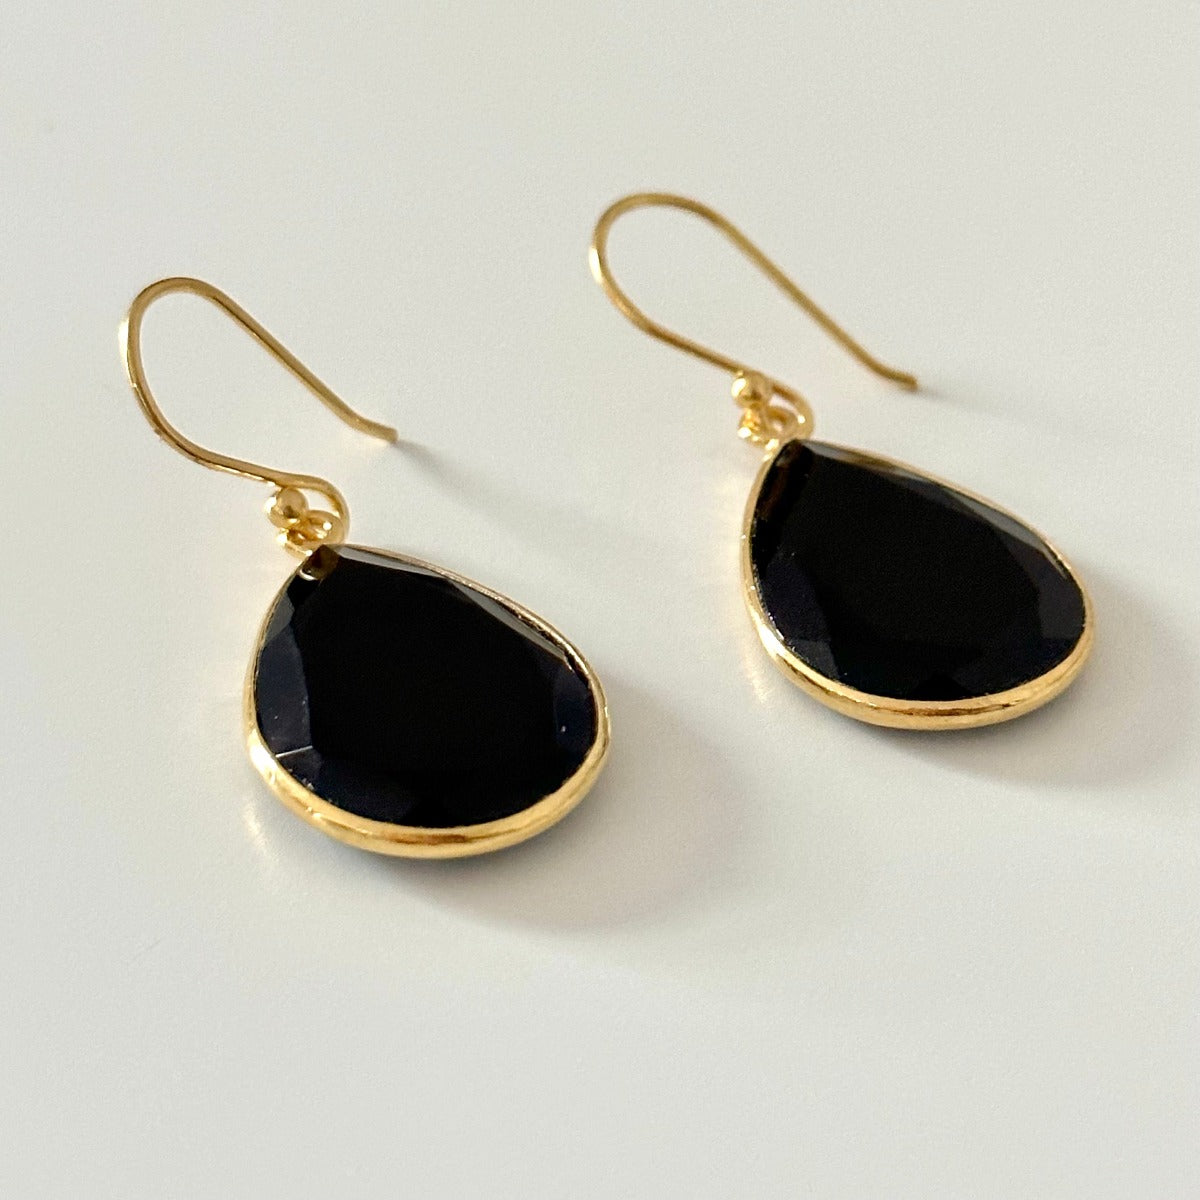 Black Onyx Gold Plated Sterling Silver Earrings with a Tear Drop Shaped Gemstone - Milina London